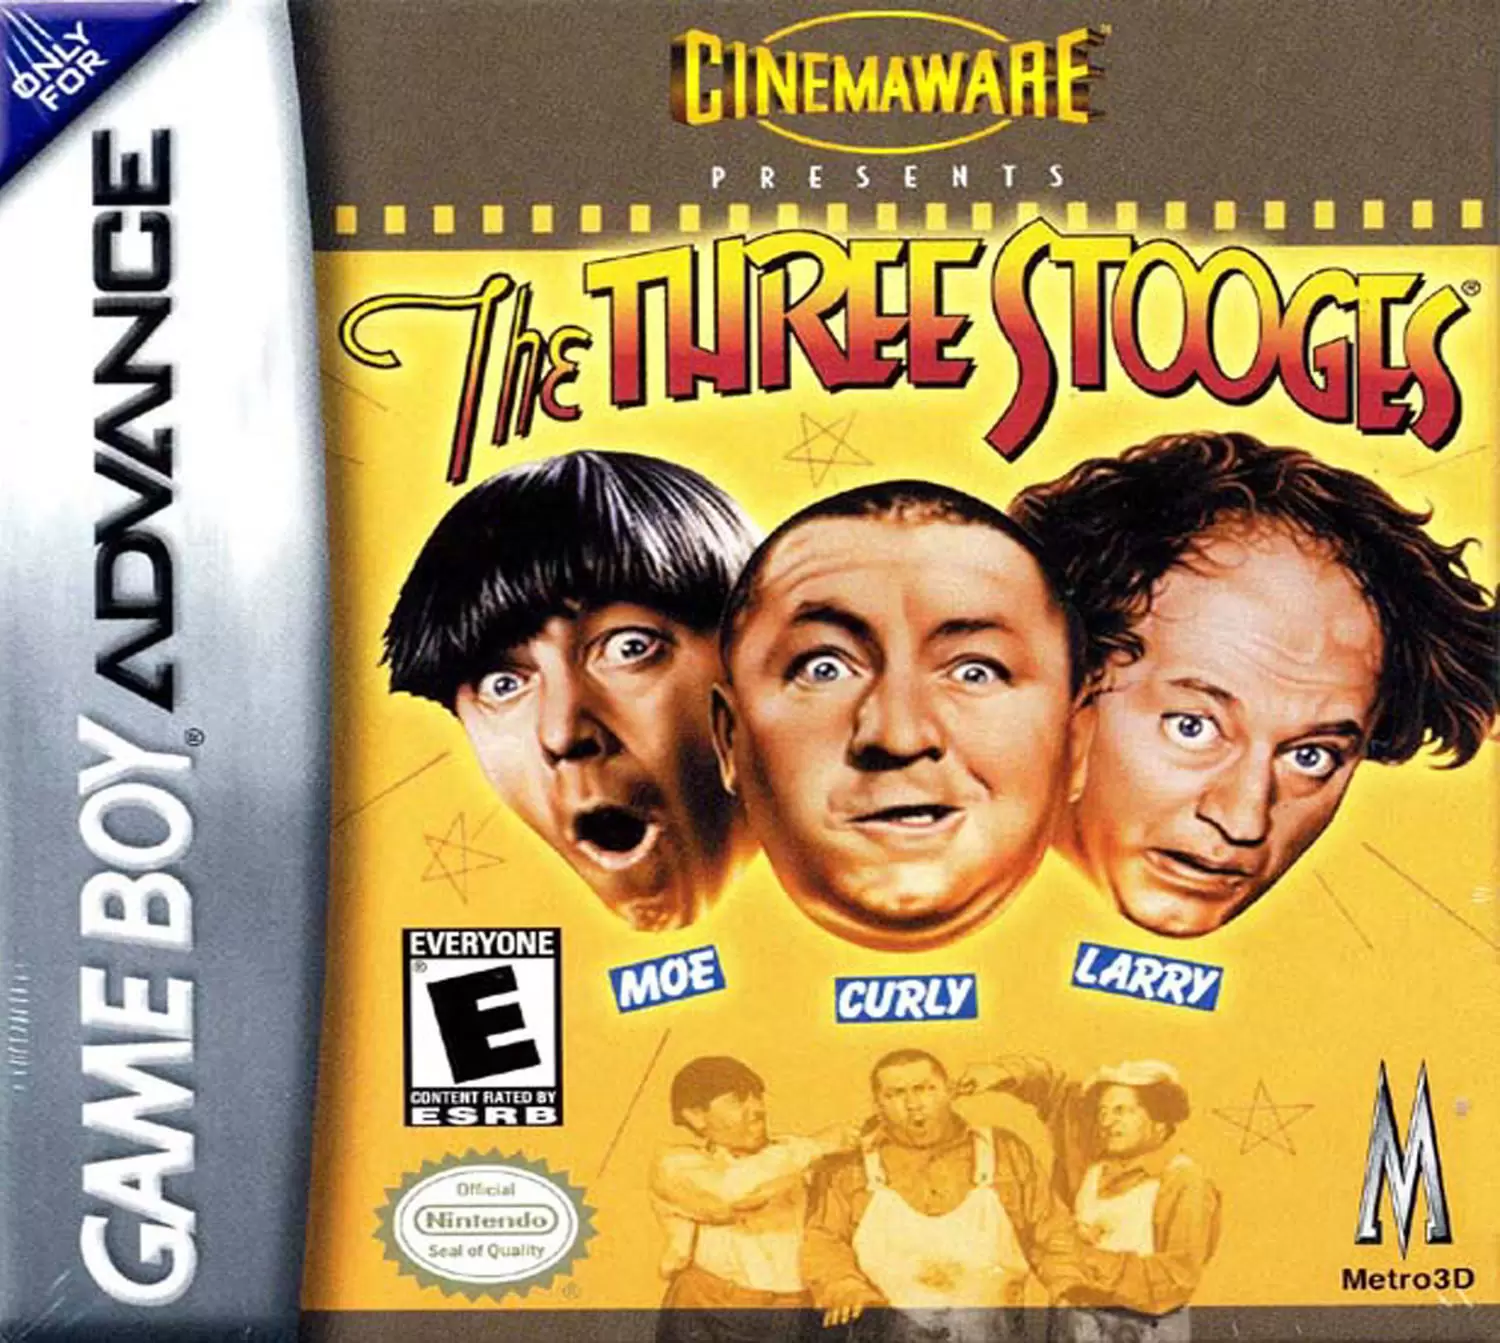 Game Boy Advance Games - The Three Stooges